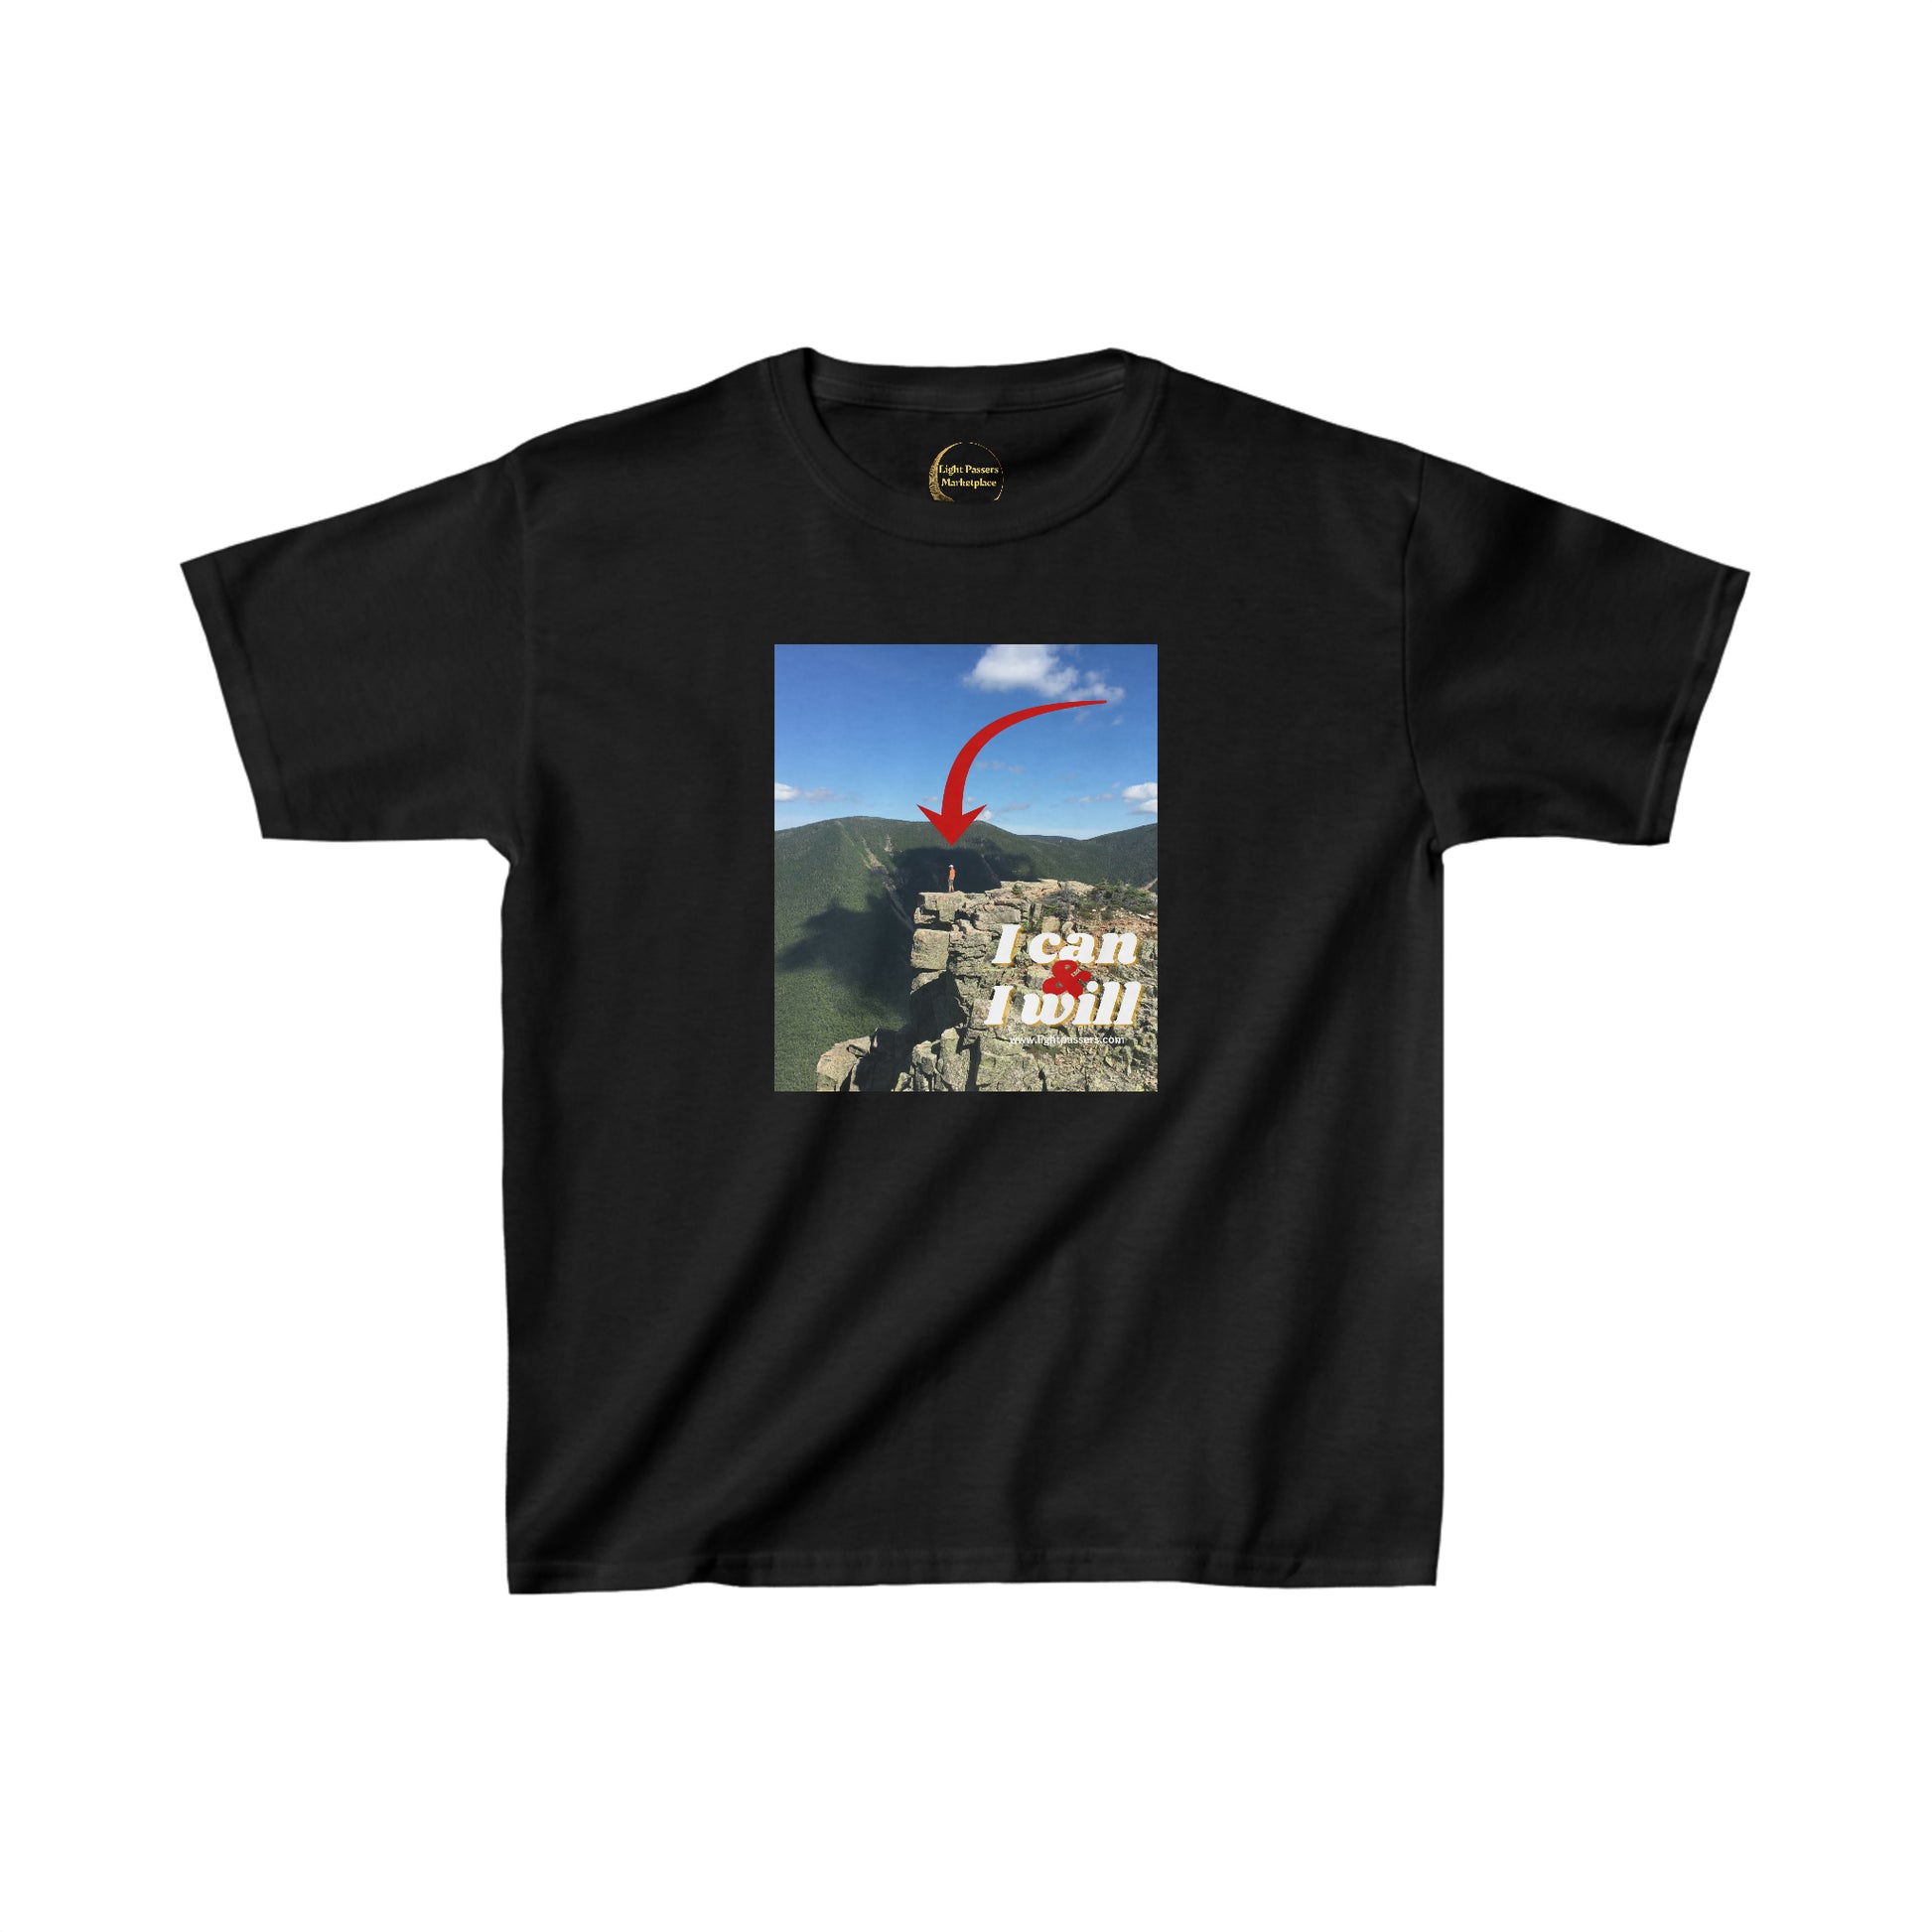 Youth black t-shirt featuring a mountain and red arrow design. Made of 100% cotton, with twill tape shoulders for durability and ribbed collar for curl resistance. Ethically sourced US cotton.